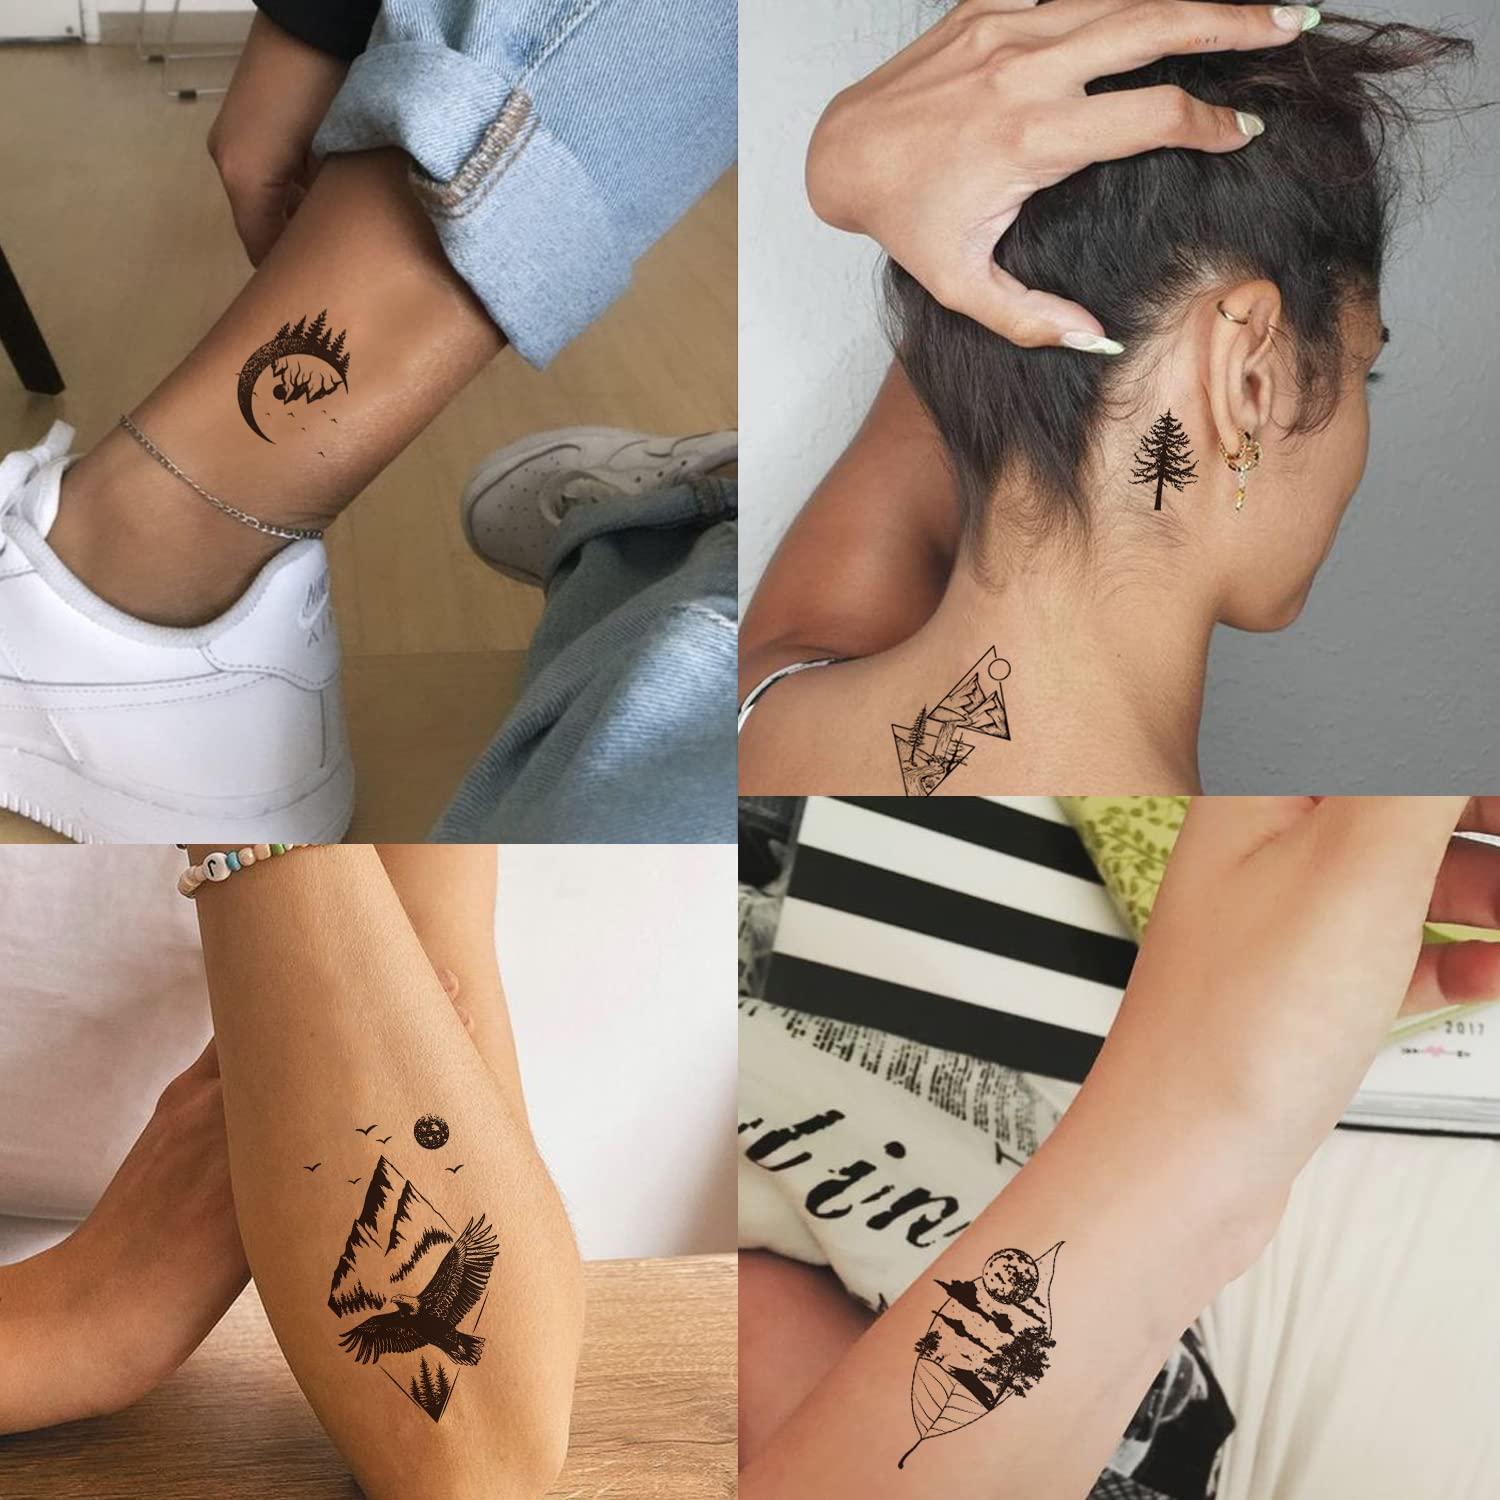 Tiny matching space tattoos 💖💖💖 | Matching best friend tattoos, Friend  tattoos, Planet tattoos